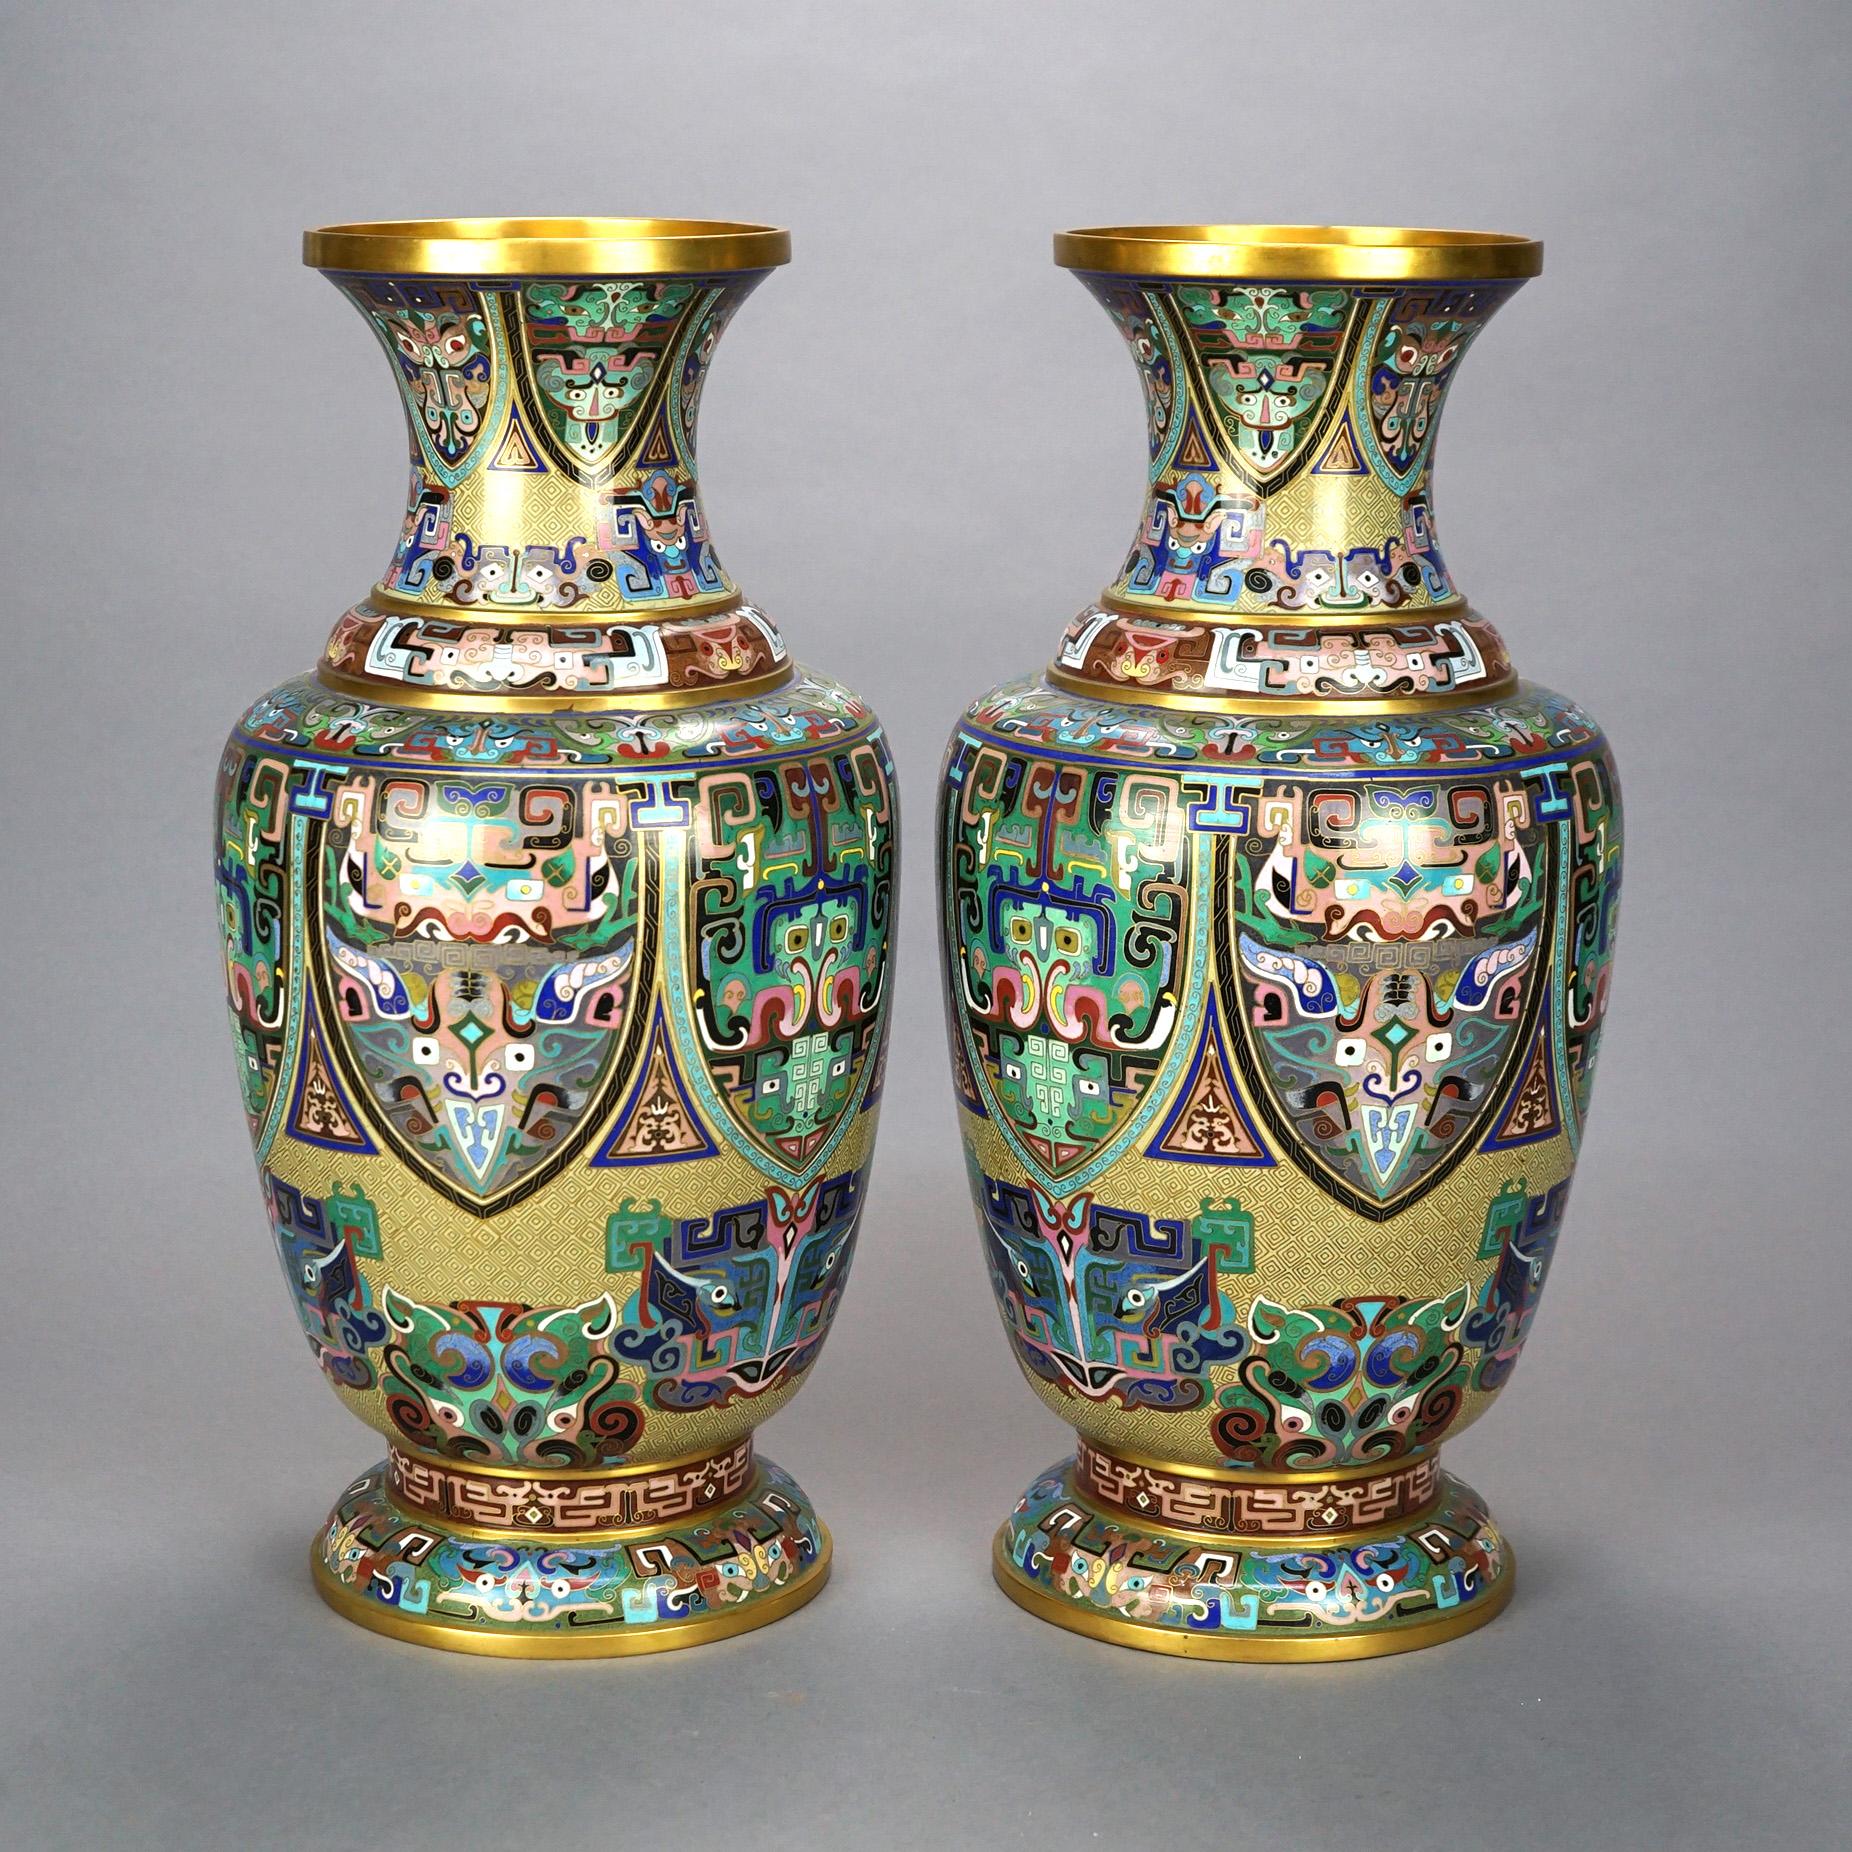 A pair of large Chinese vases offer metal construction decorated with cloisonne enamel design with included stylized foliate and animal elements, 20th century

Measures- 20.5''H x 10''W x 10''D.